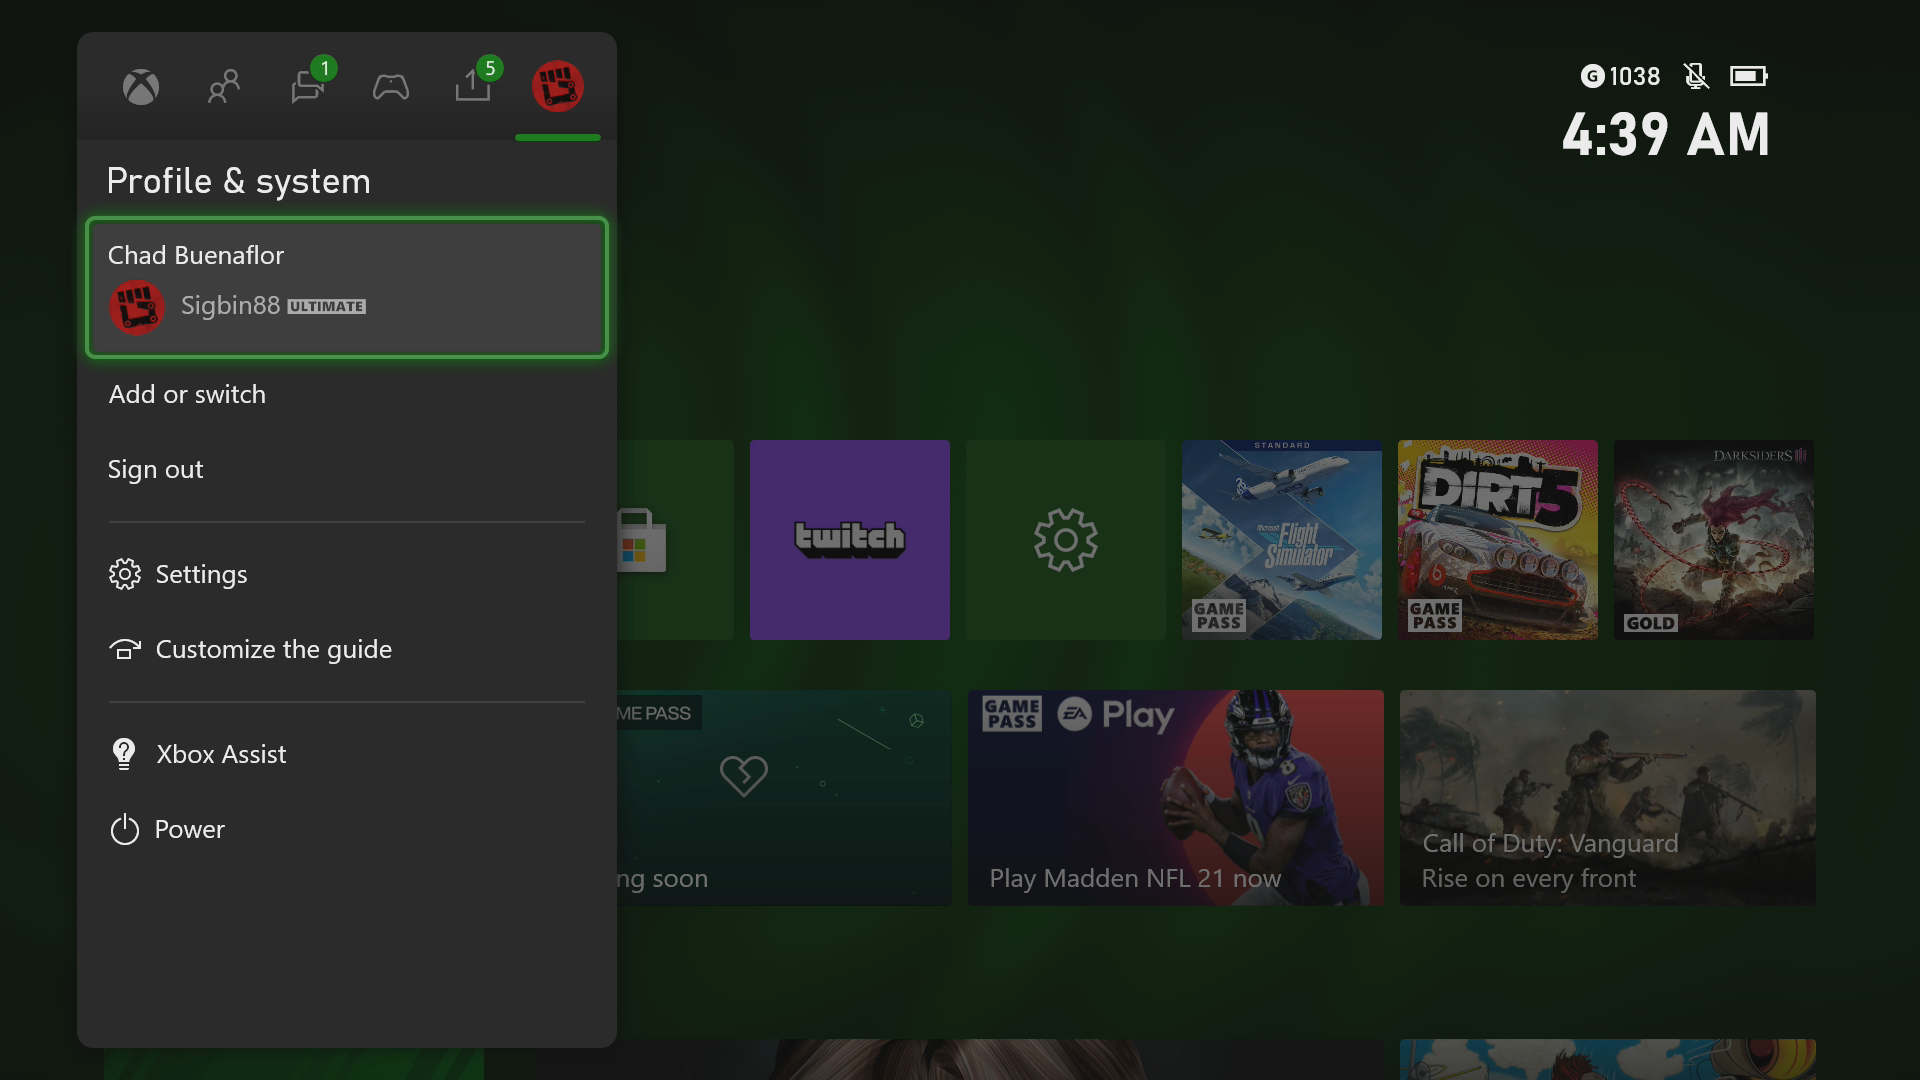 What to do when you get Twitch connection errors on your Xbox console